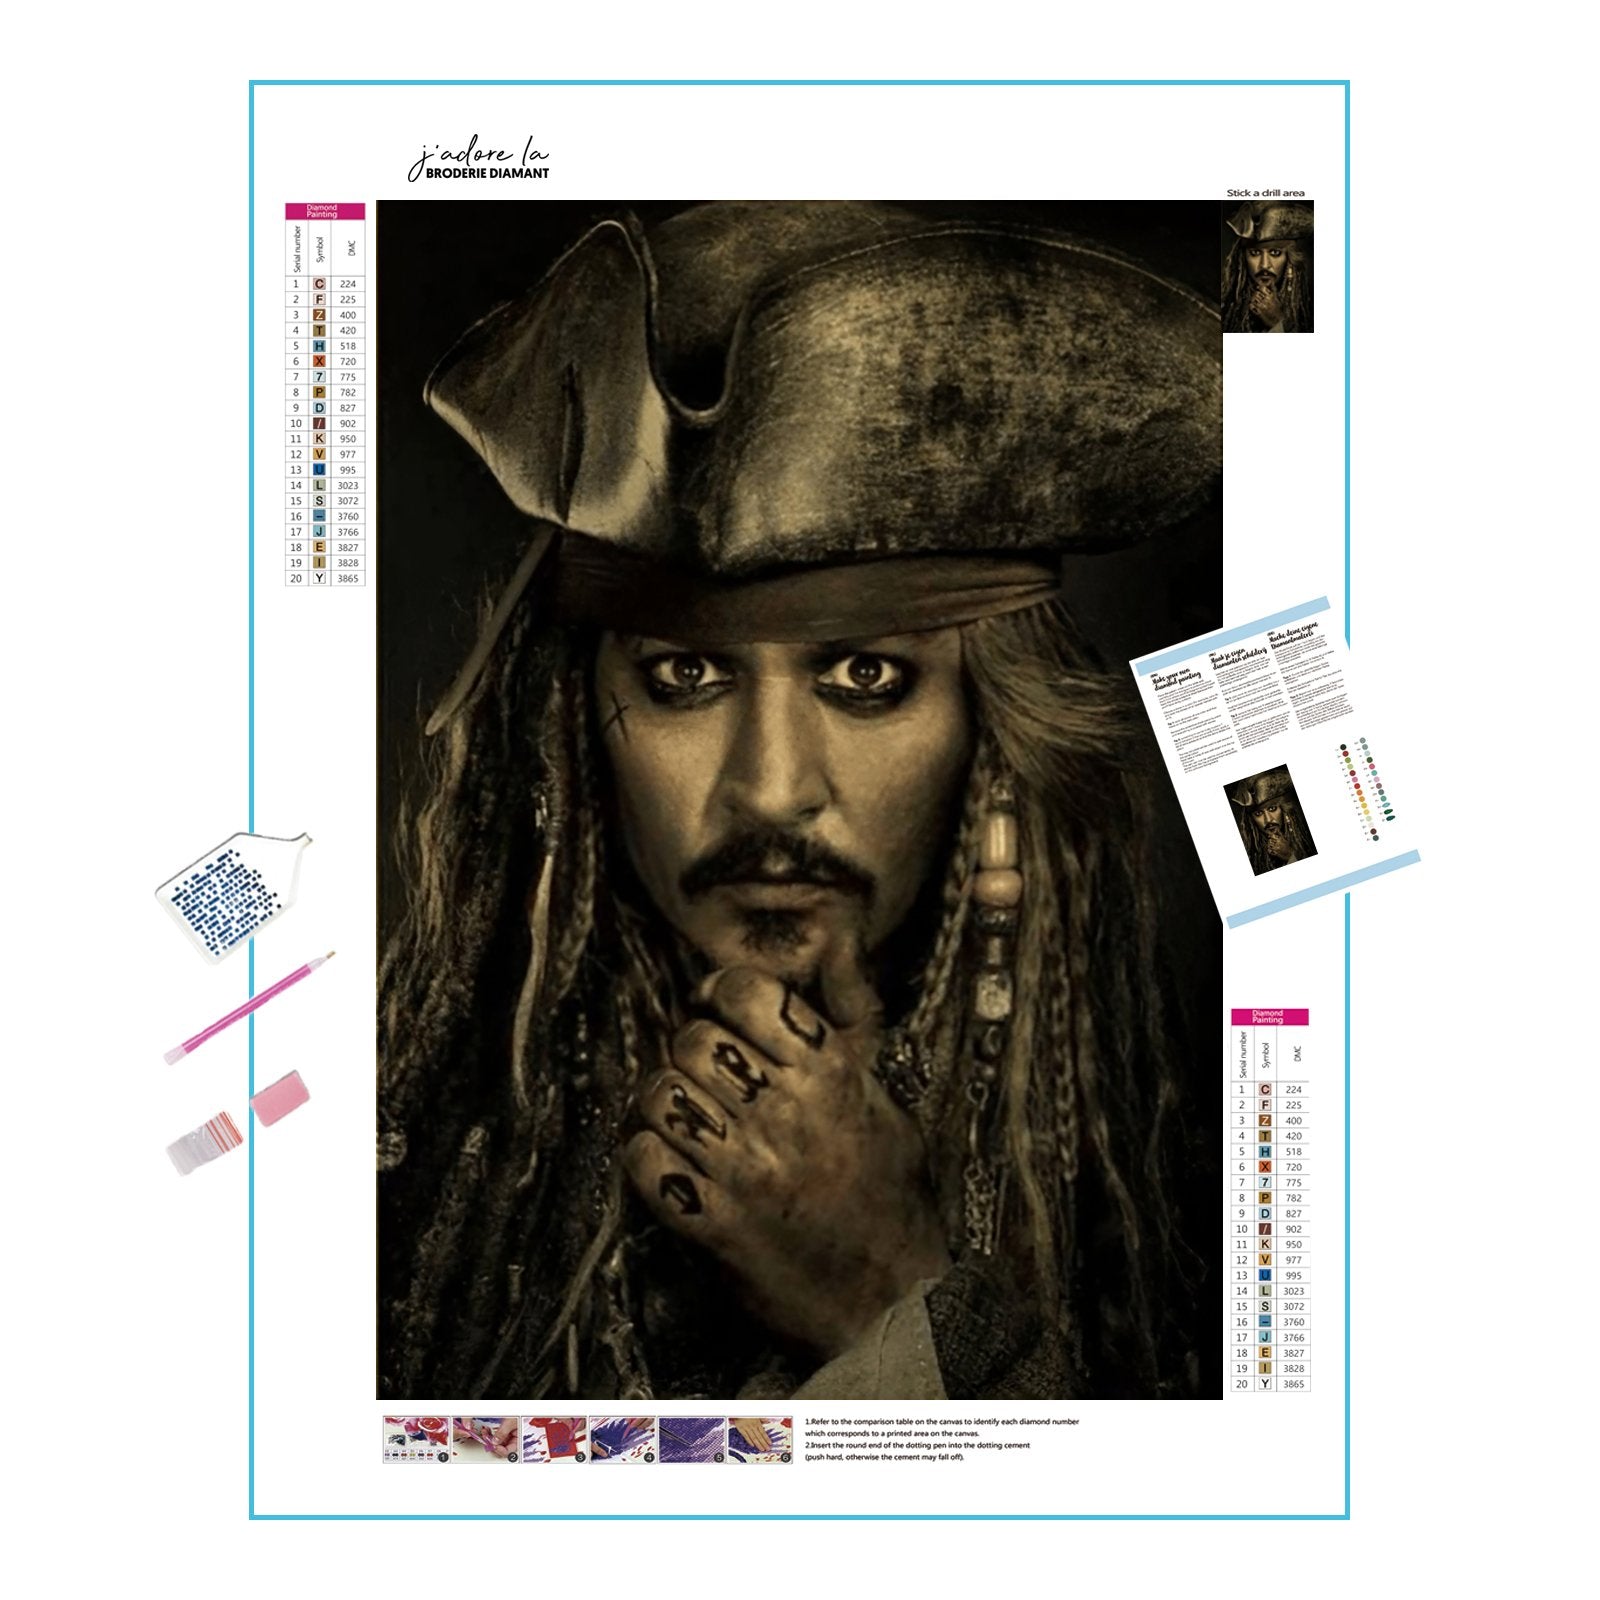 Embark on a swashbuckling adventure with the iconic Captain Jack Sparrow.Captain Jack Sparrow - Diamondartlove